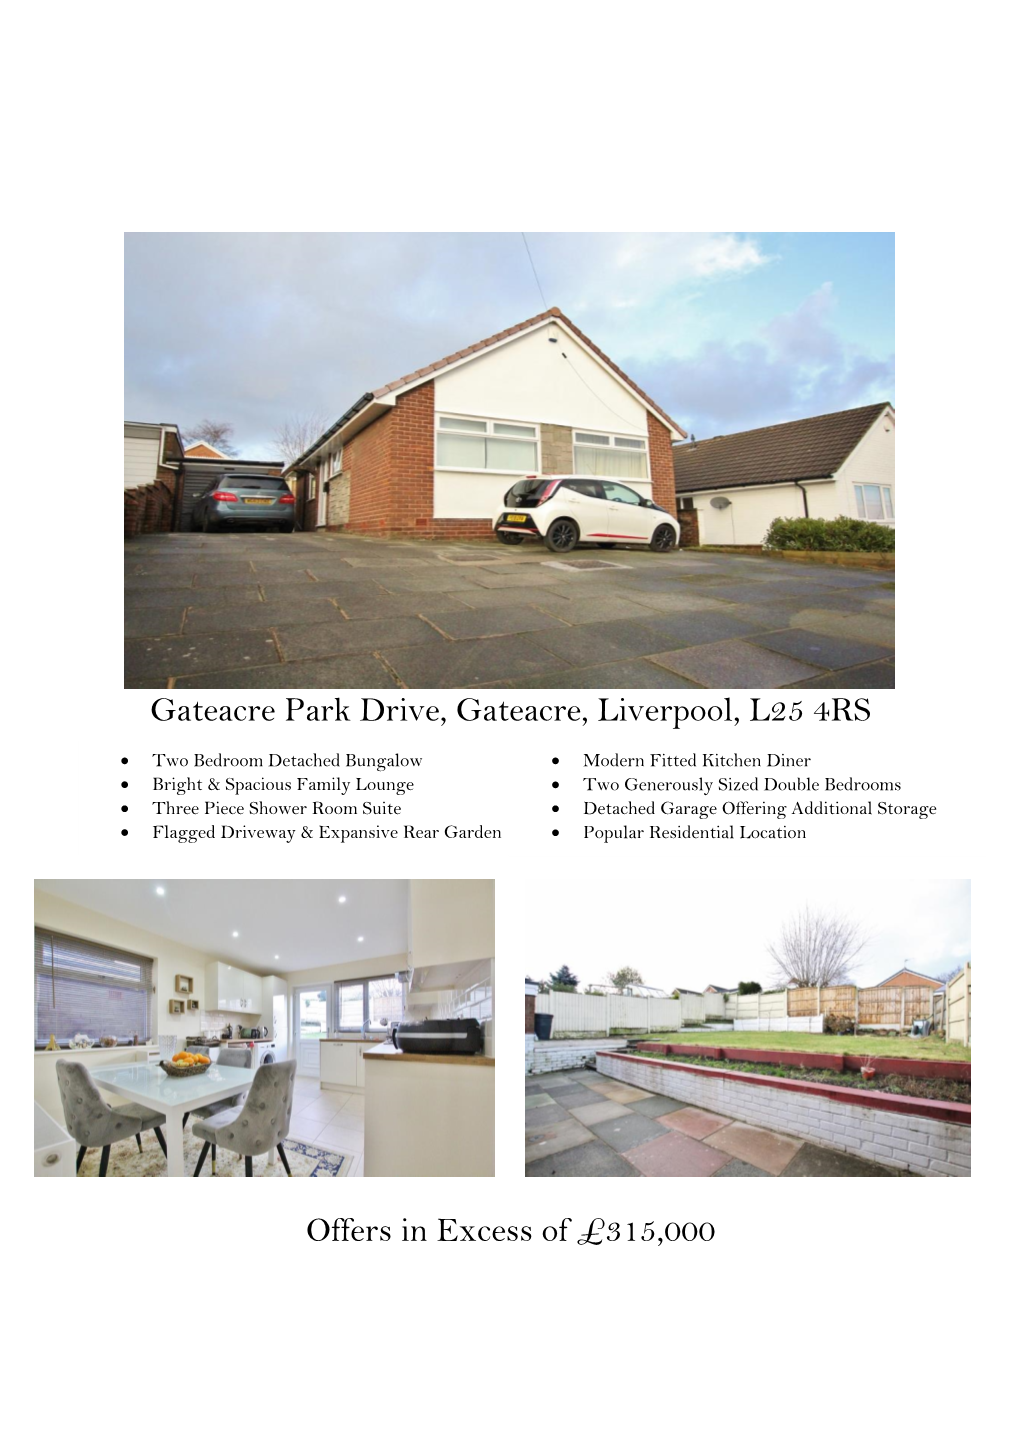 Gateacre Park Drive, Gateacre, Liverpool, L25 4RS Offers in Excess of £315,000